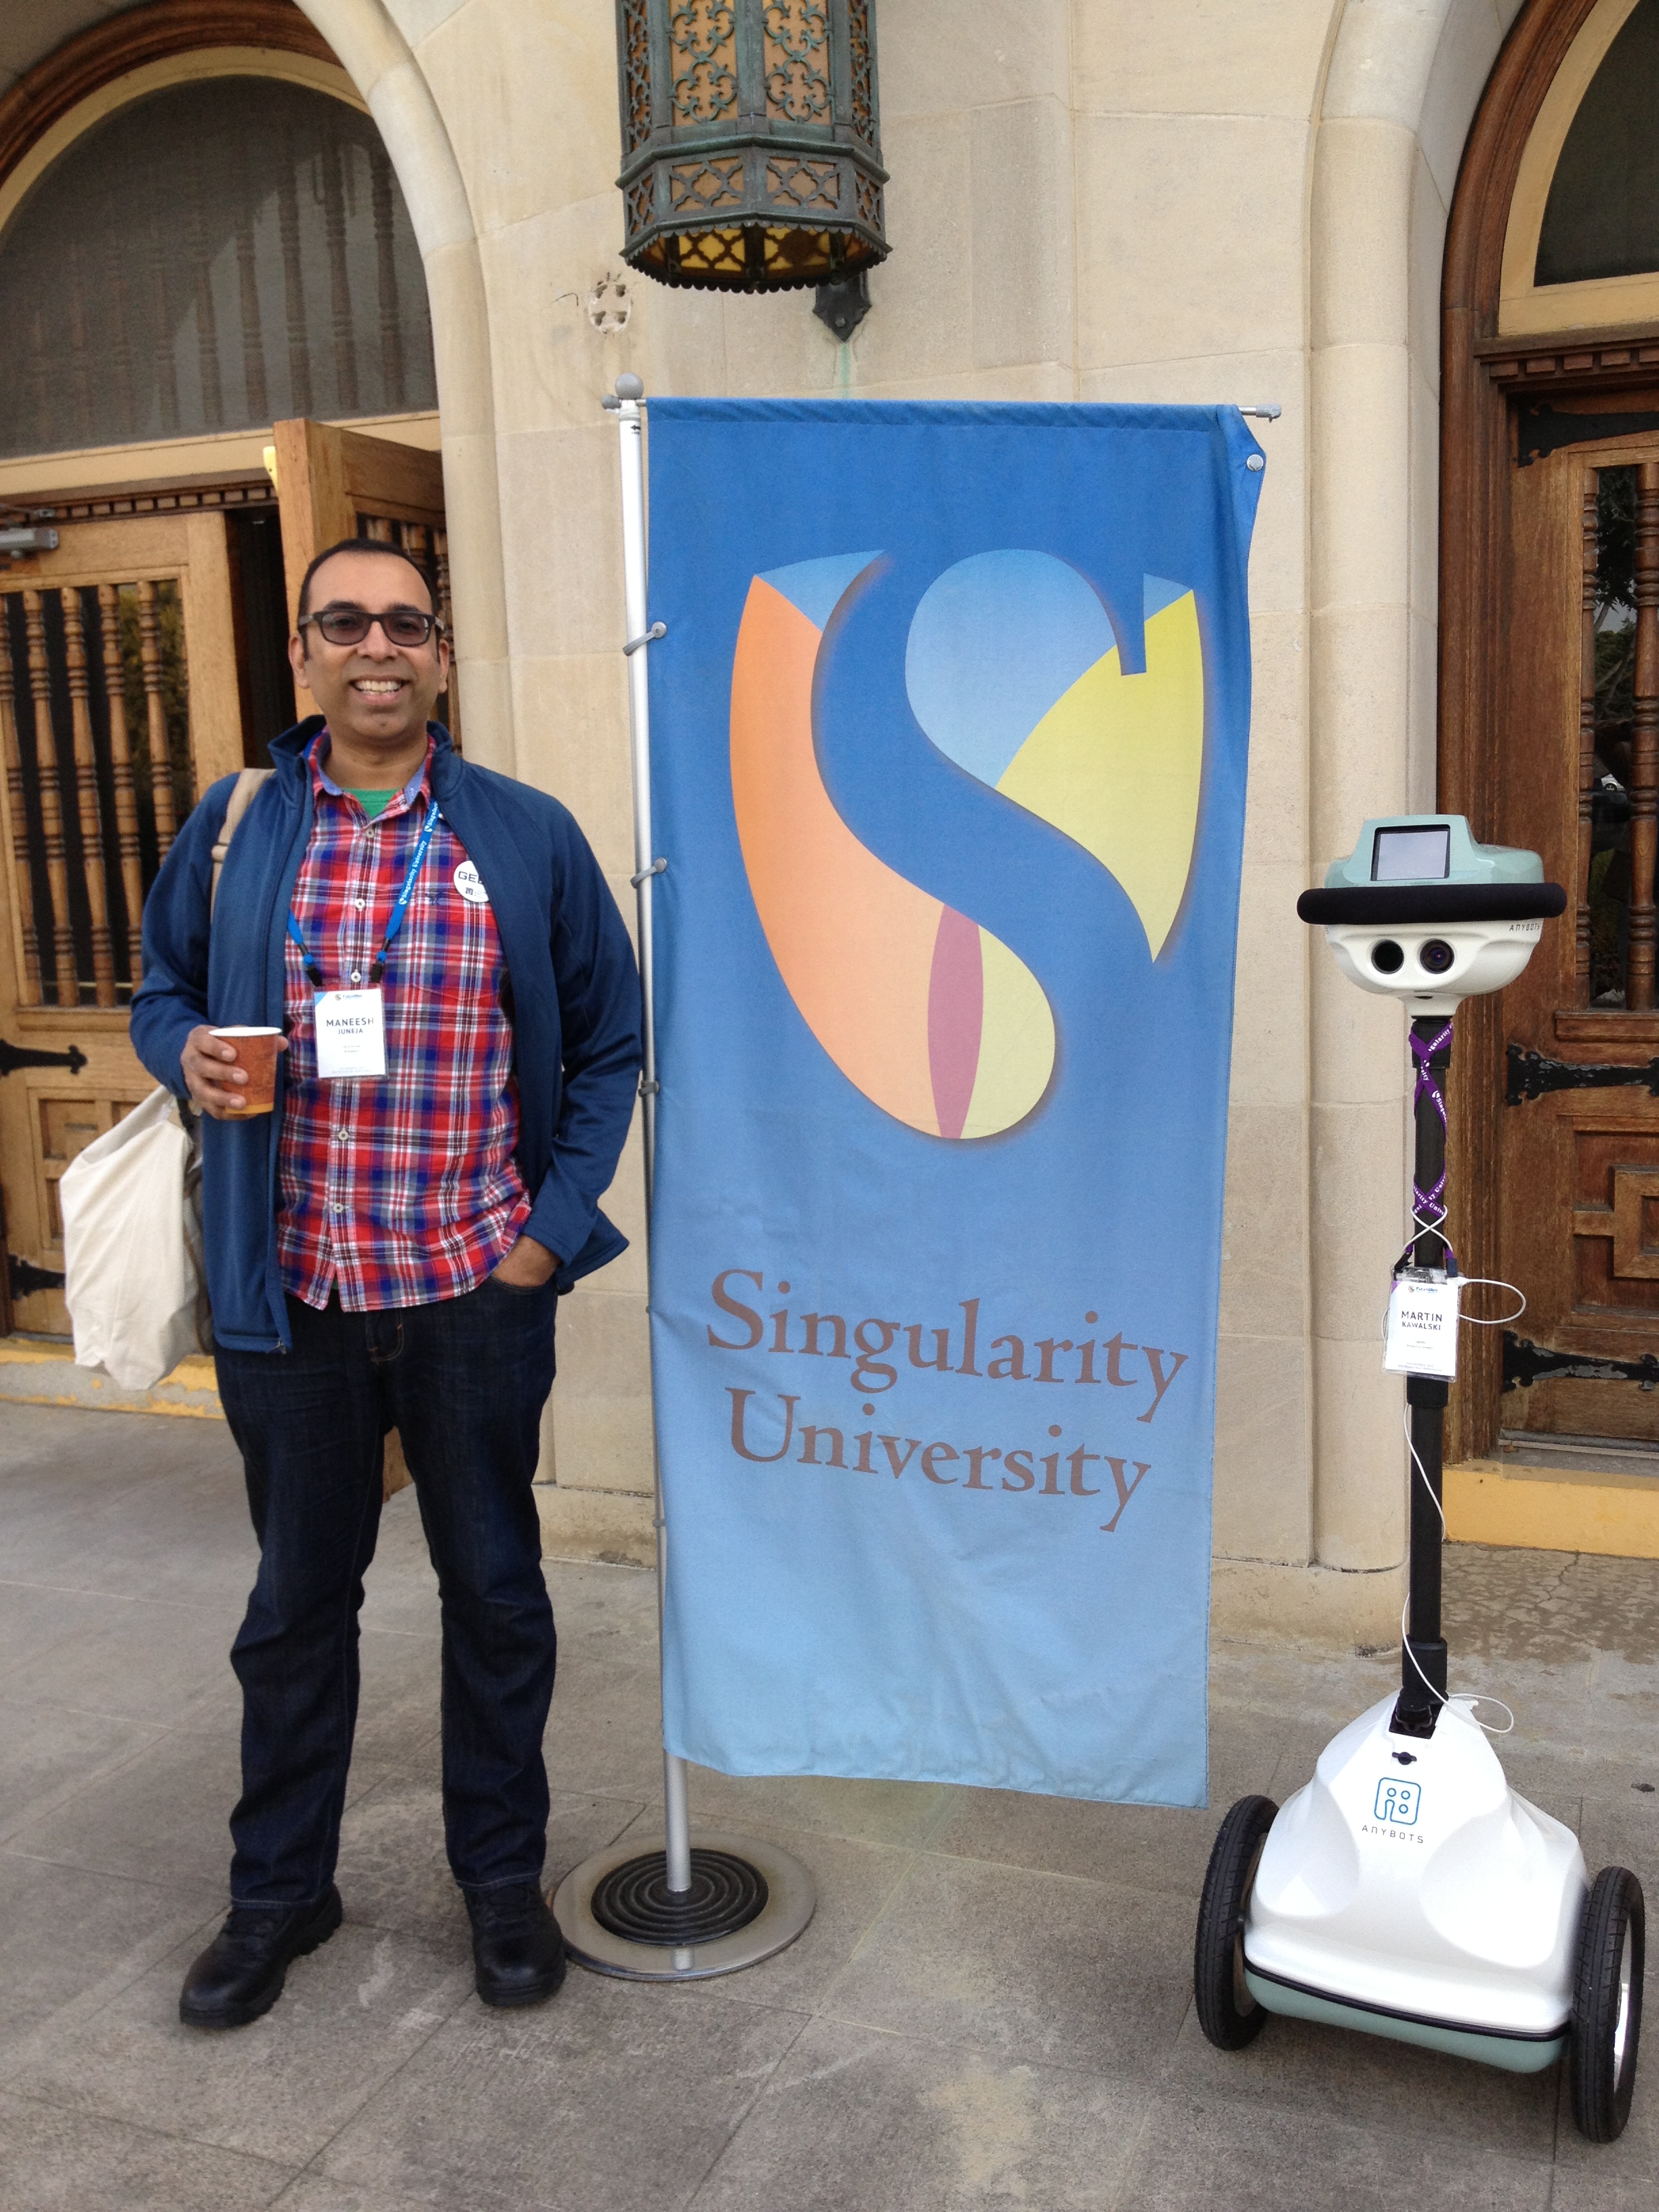  When I turned up to Singularity University, I was greeted by a virtual human! 